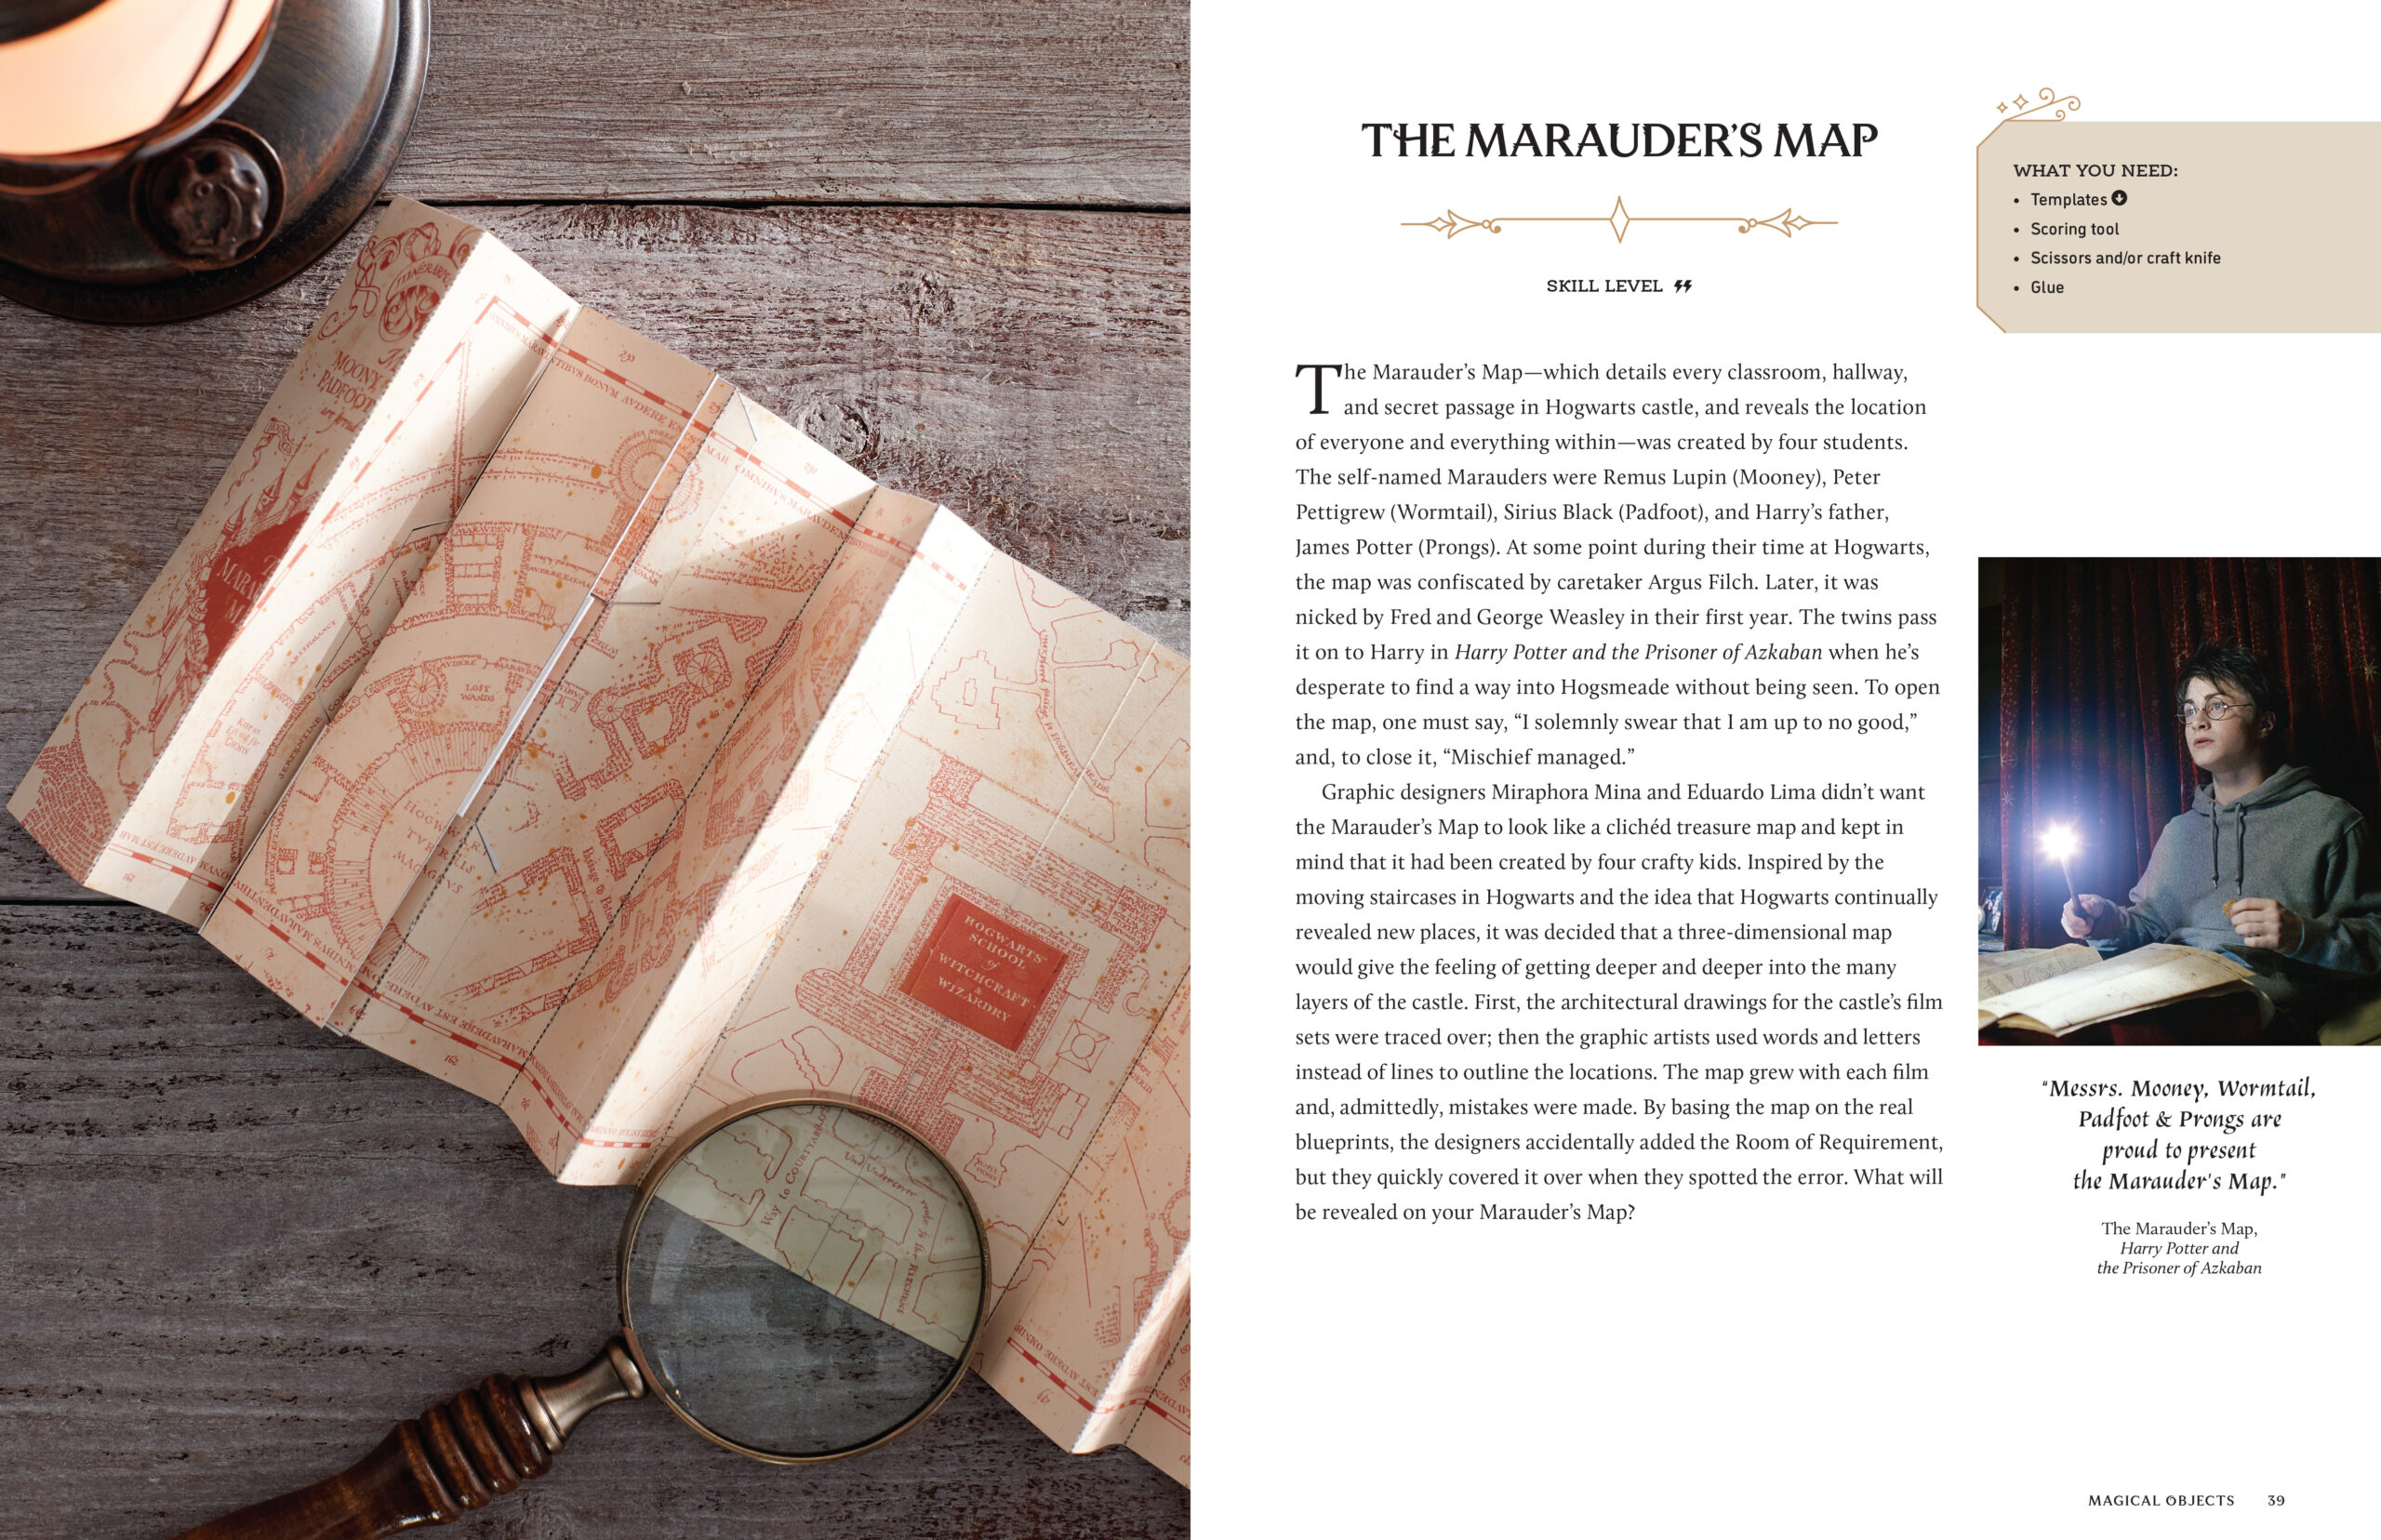 “Harry Potter: Magical Paper Crafts” features a Marauder’s Map craft.